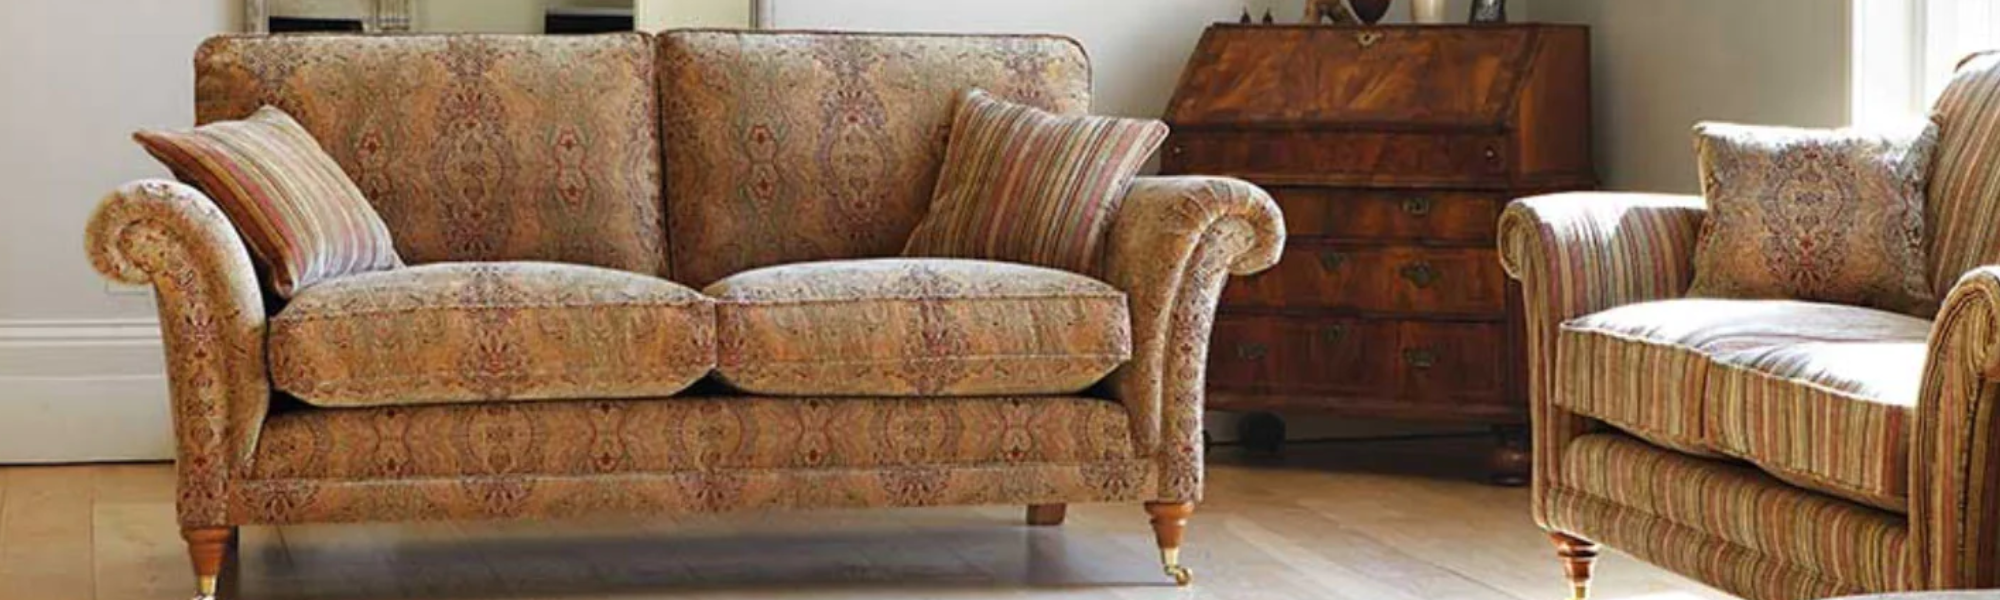 Parker Knoll Upholstery At Kenneth, Parker Knoll Style Sofa Beds